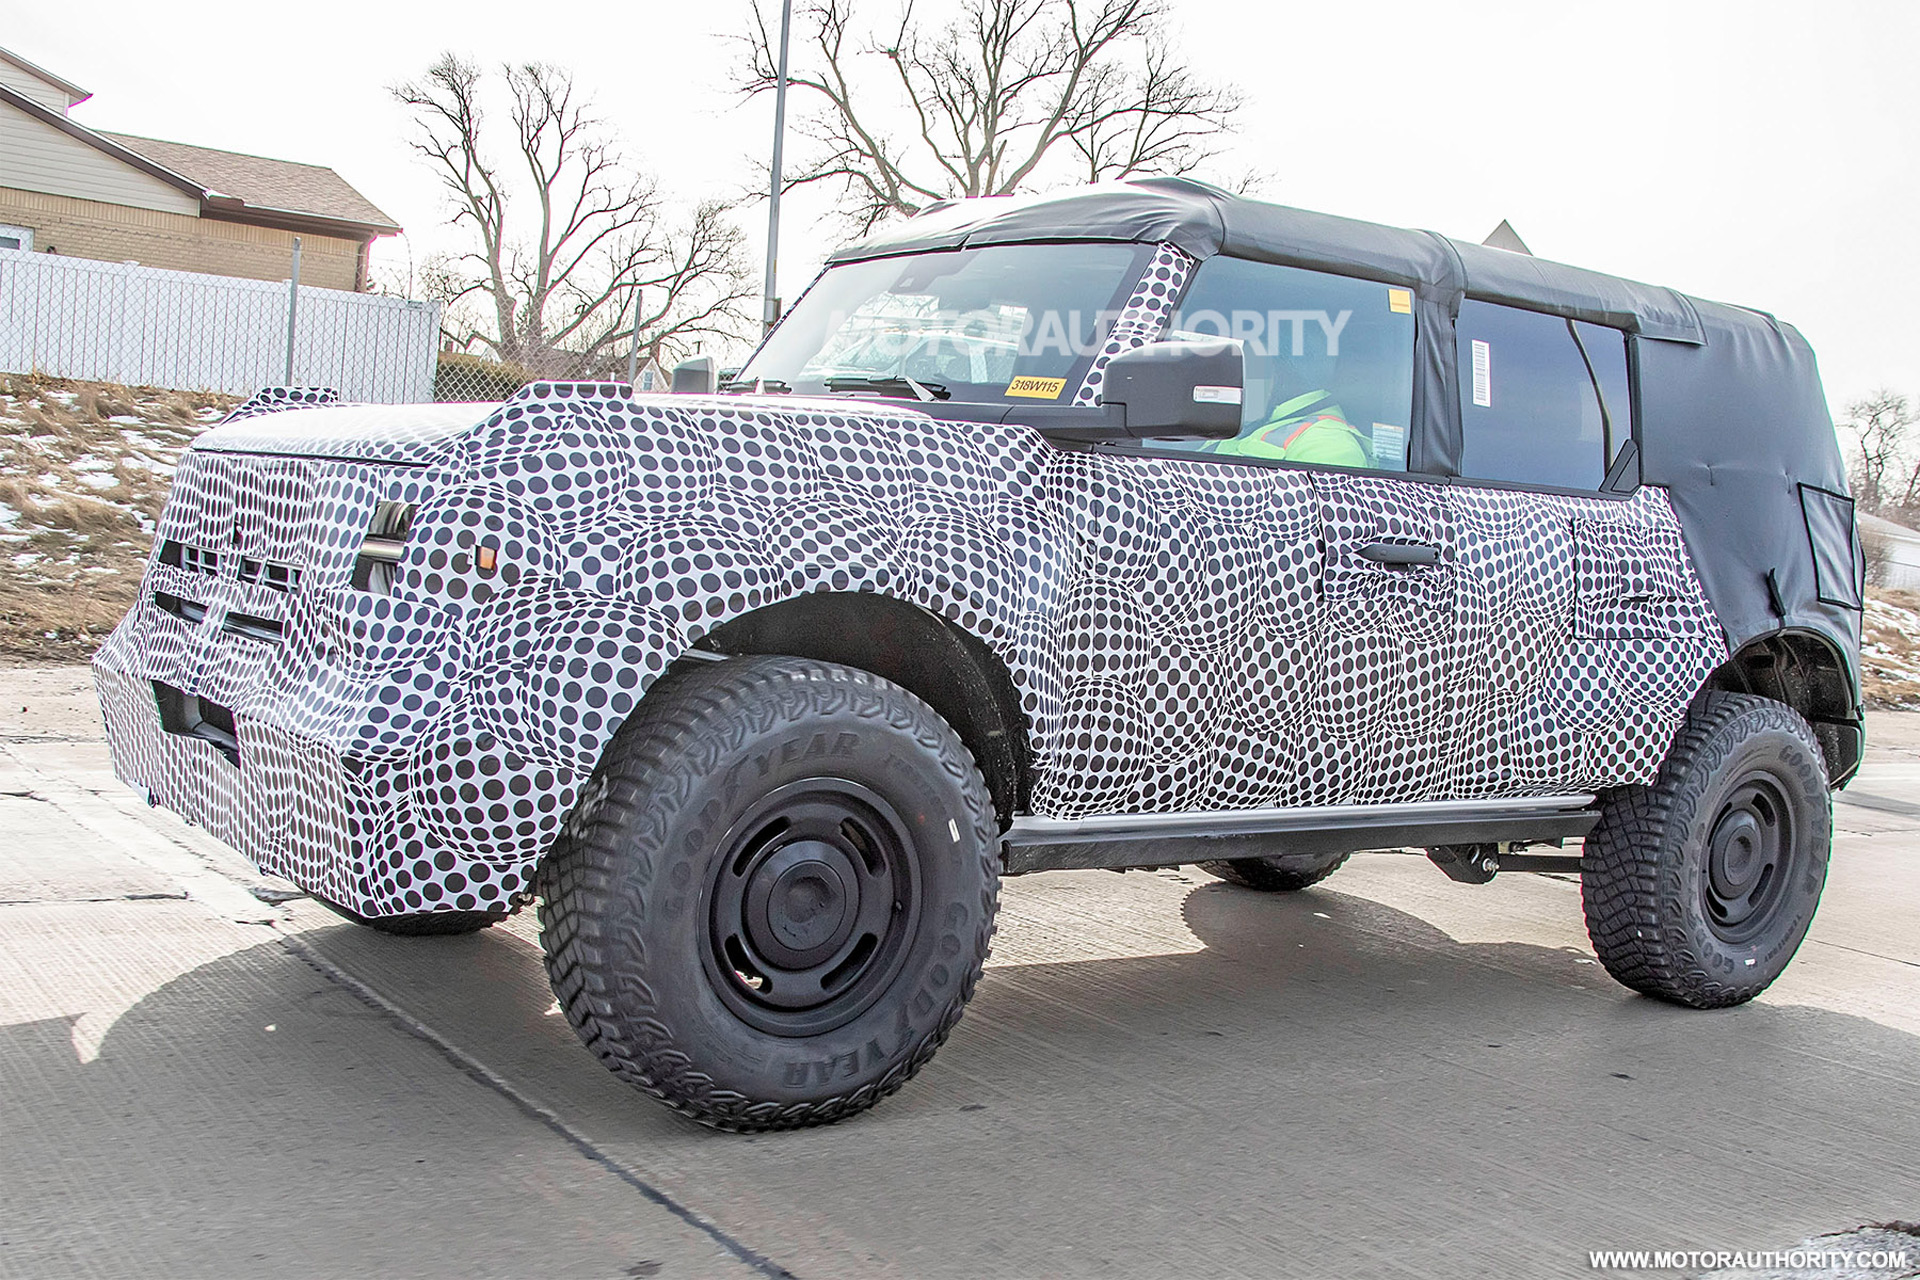 2022 Ford Bronco Heritage Edition spy shots: Retro touches on the way